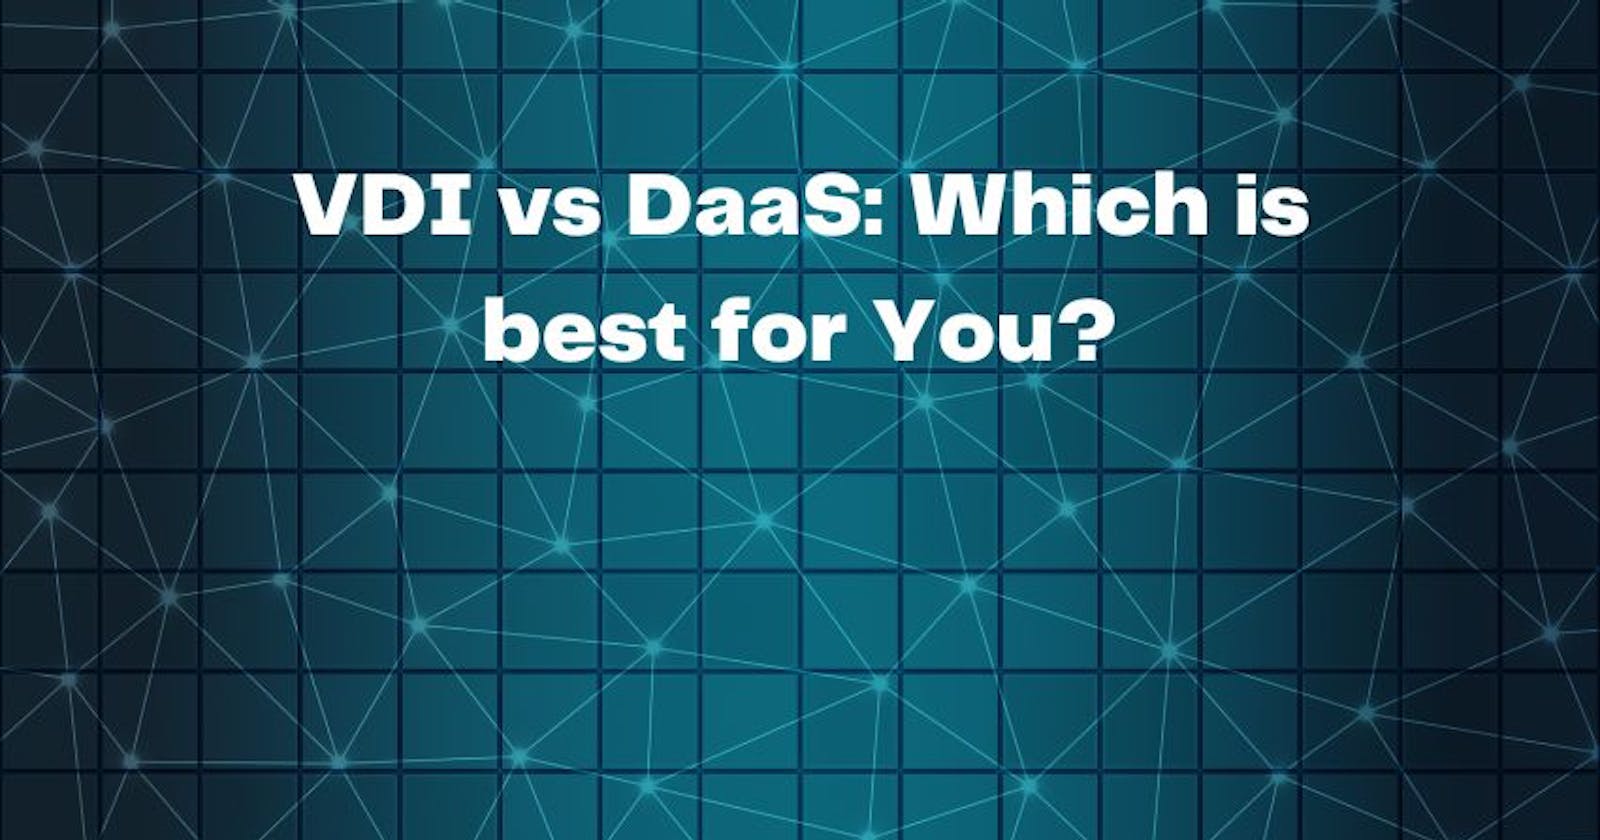 VDI and DaaS: Which is best for You!